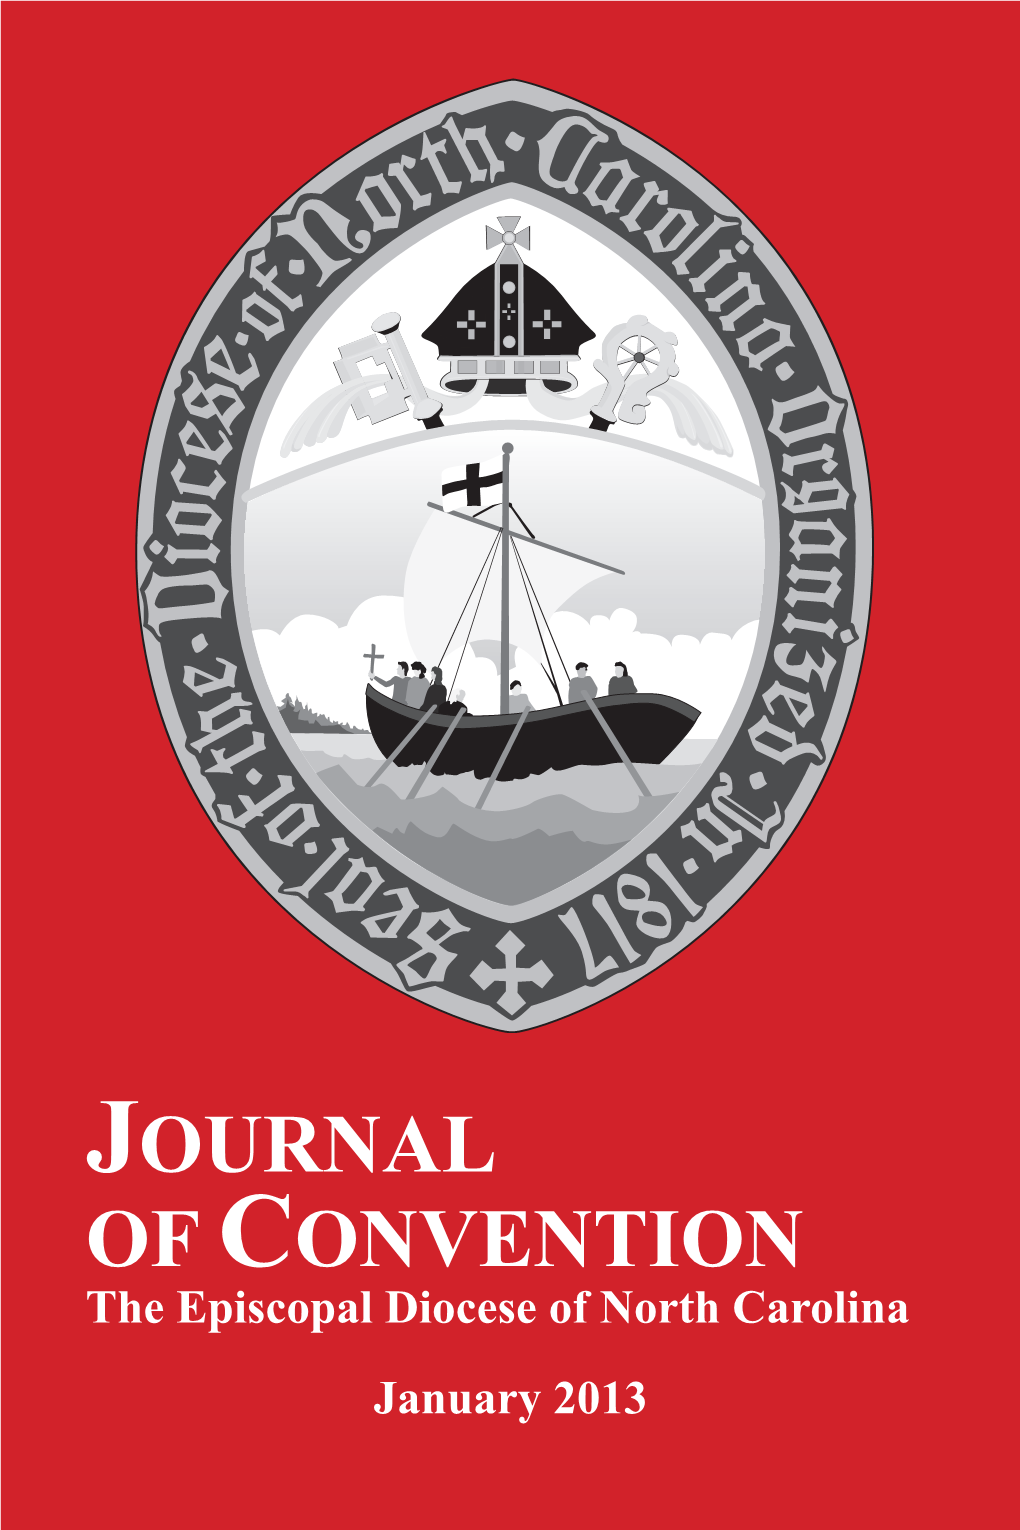 The January 2013 Journal of Convention